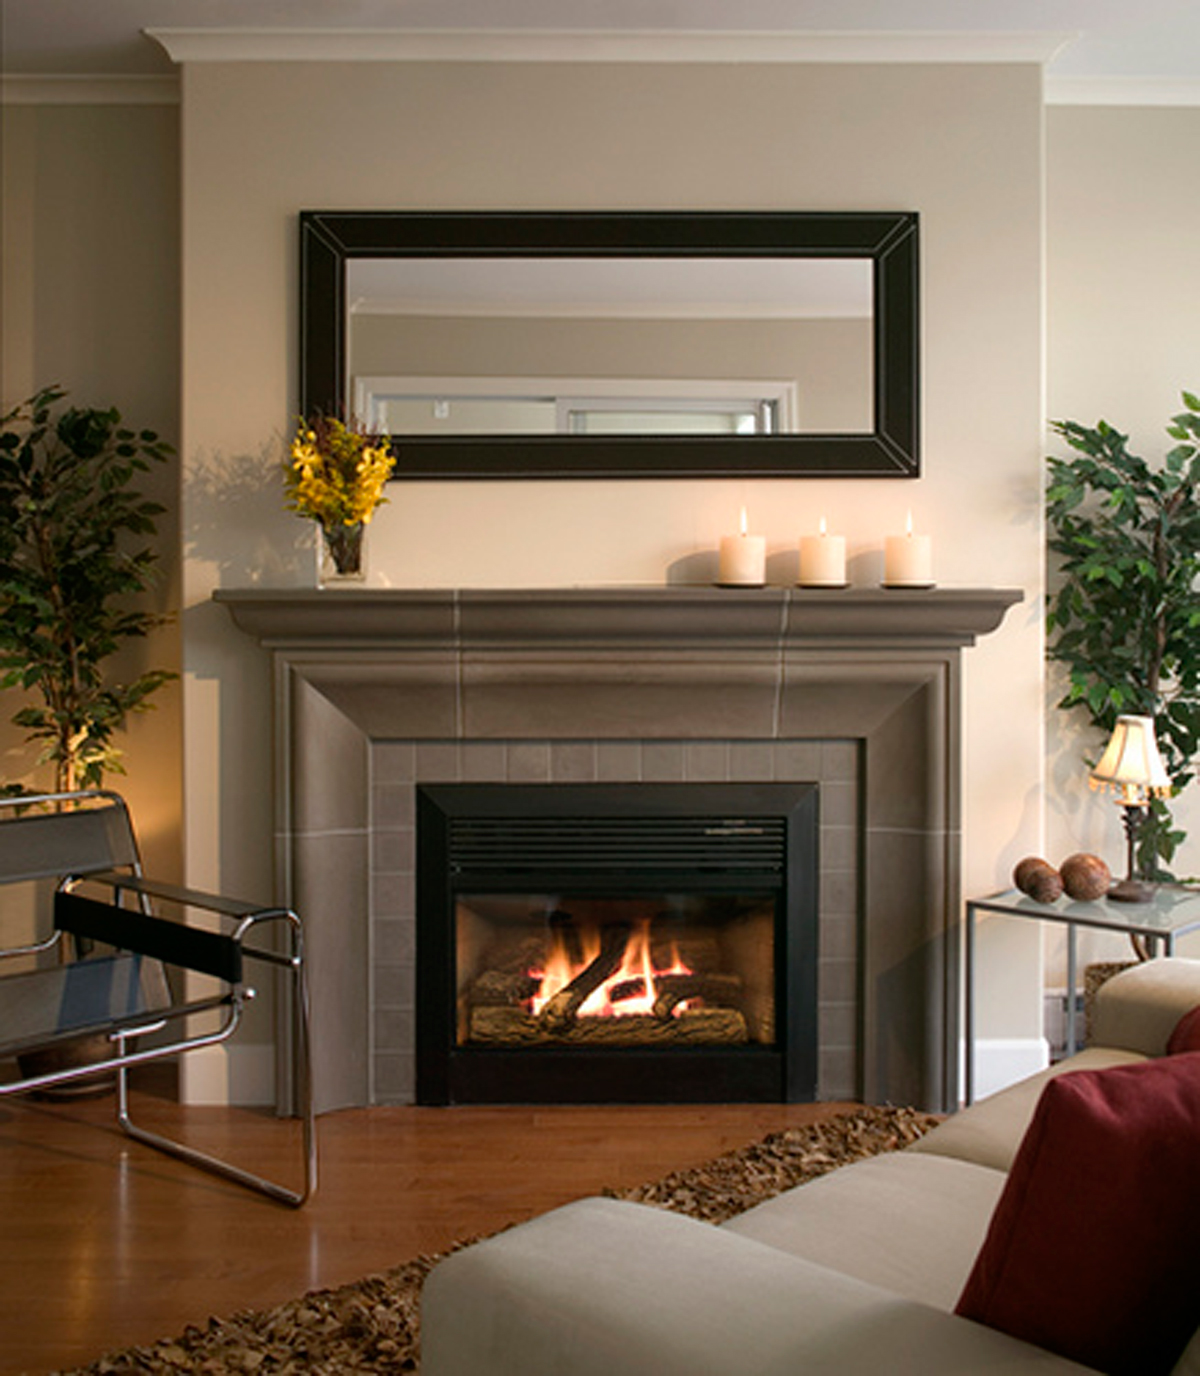 Prepare Your Fireplace for the Winter